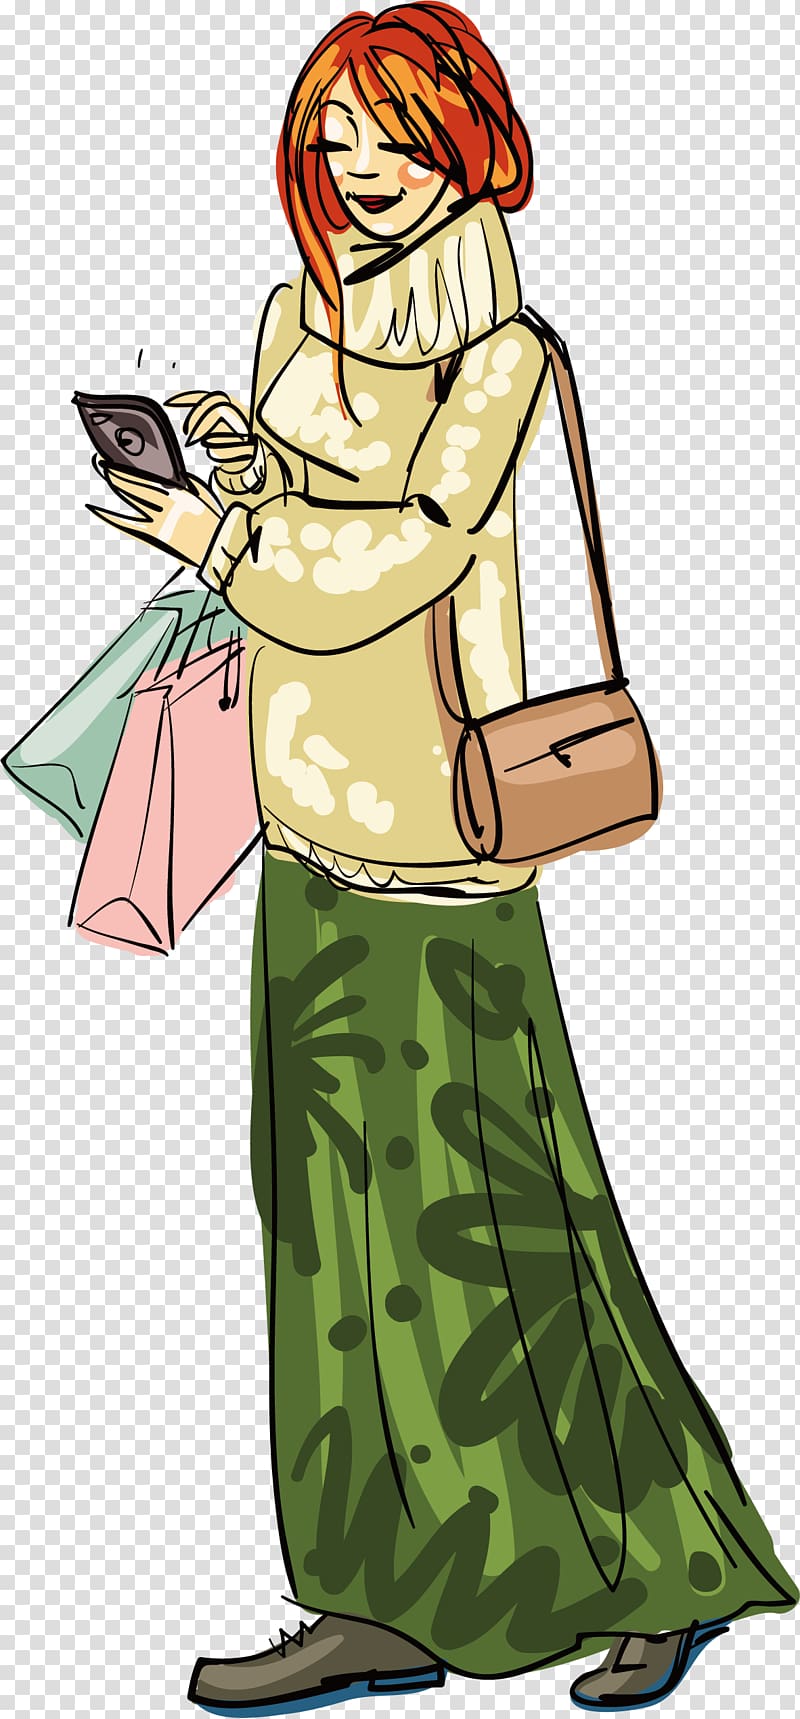 Mobile phone Google Illustration, Cell phone player transparent background PNG clipart